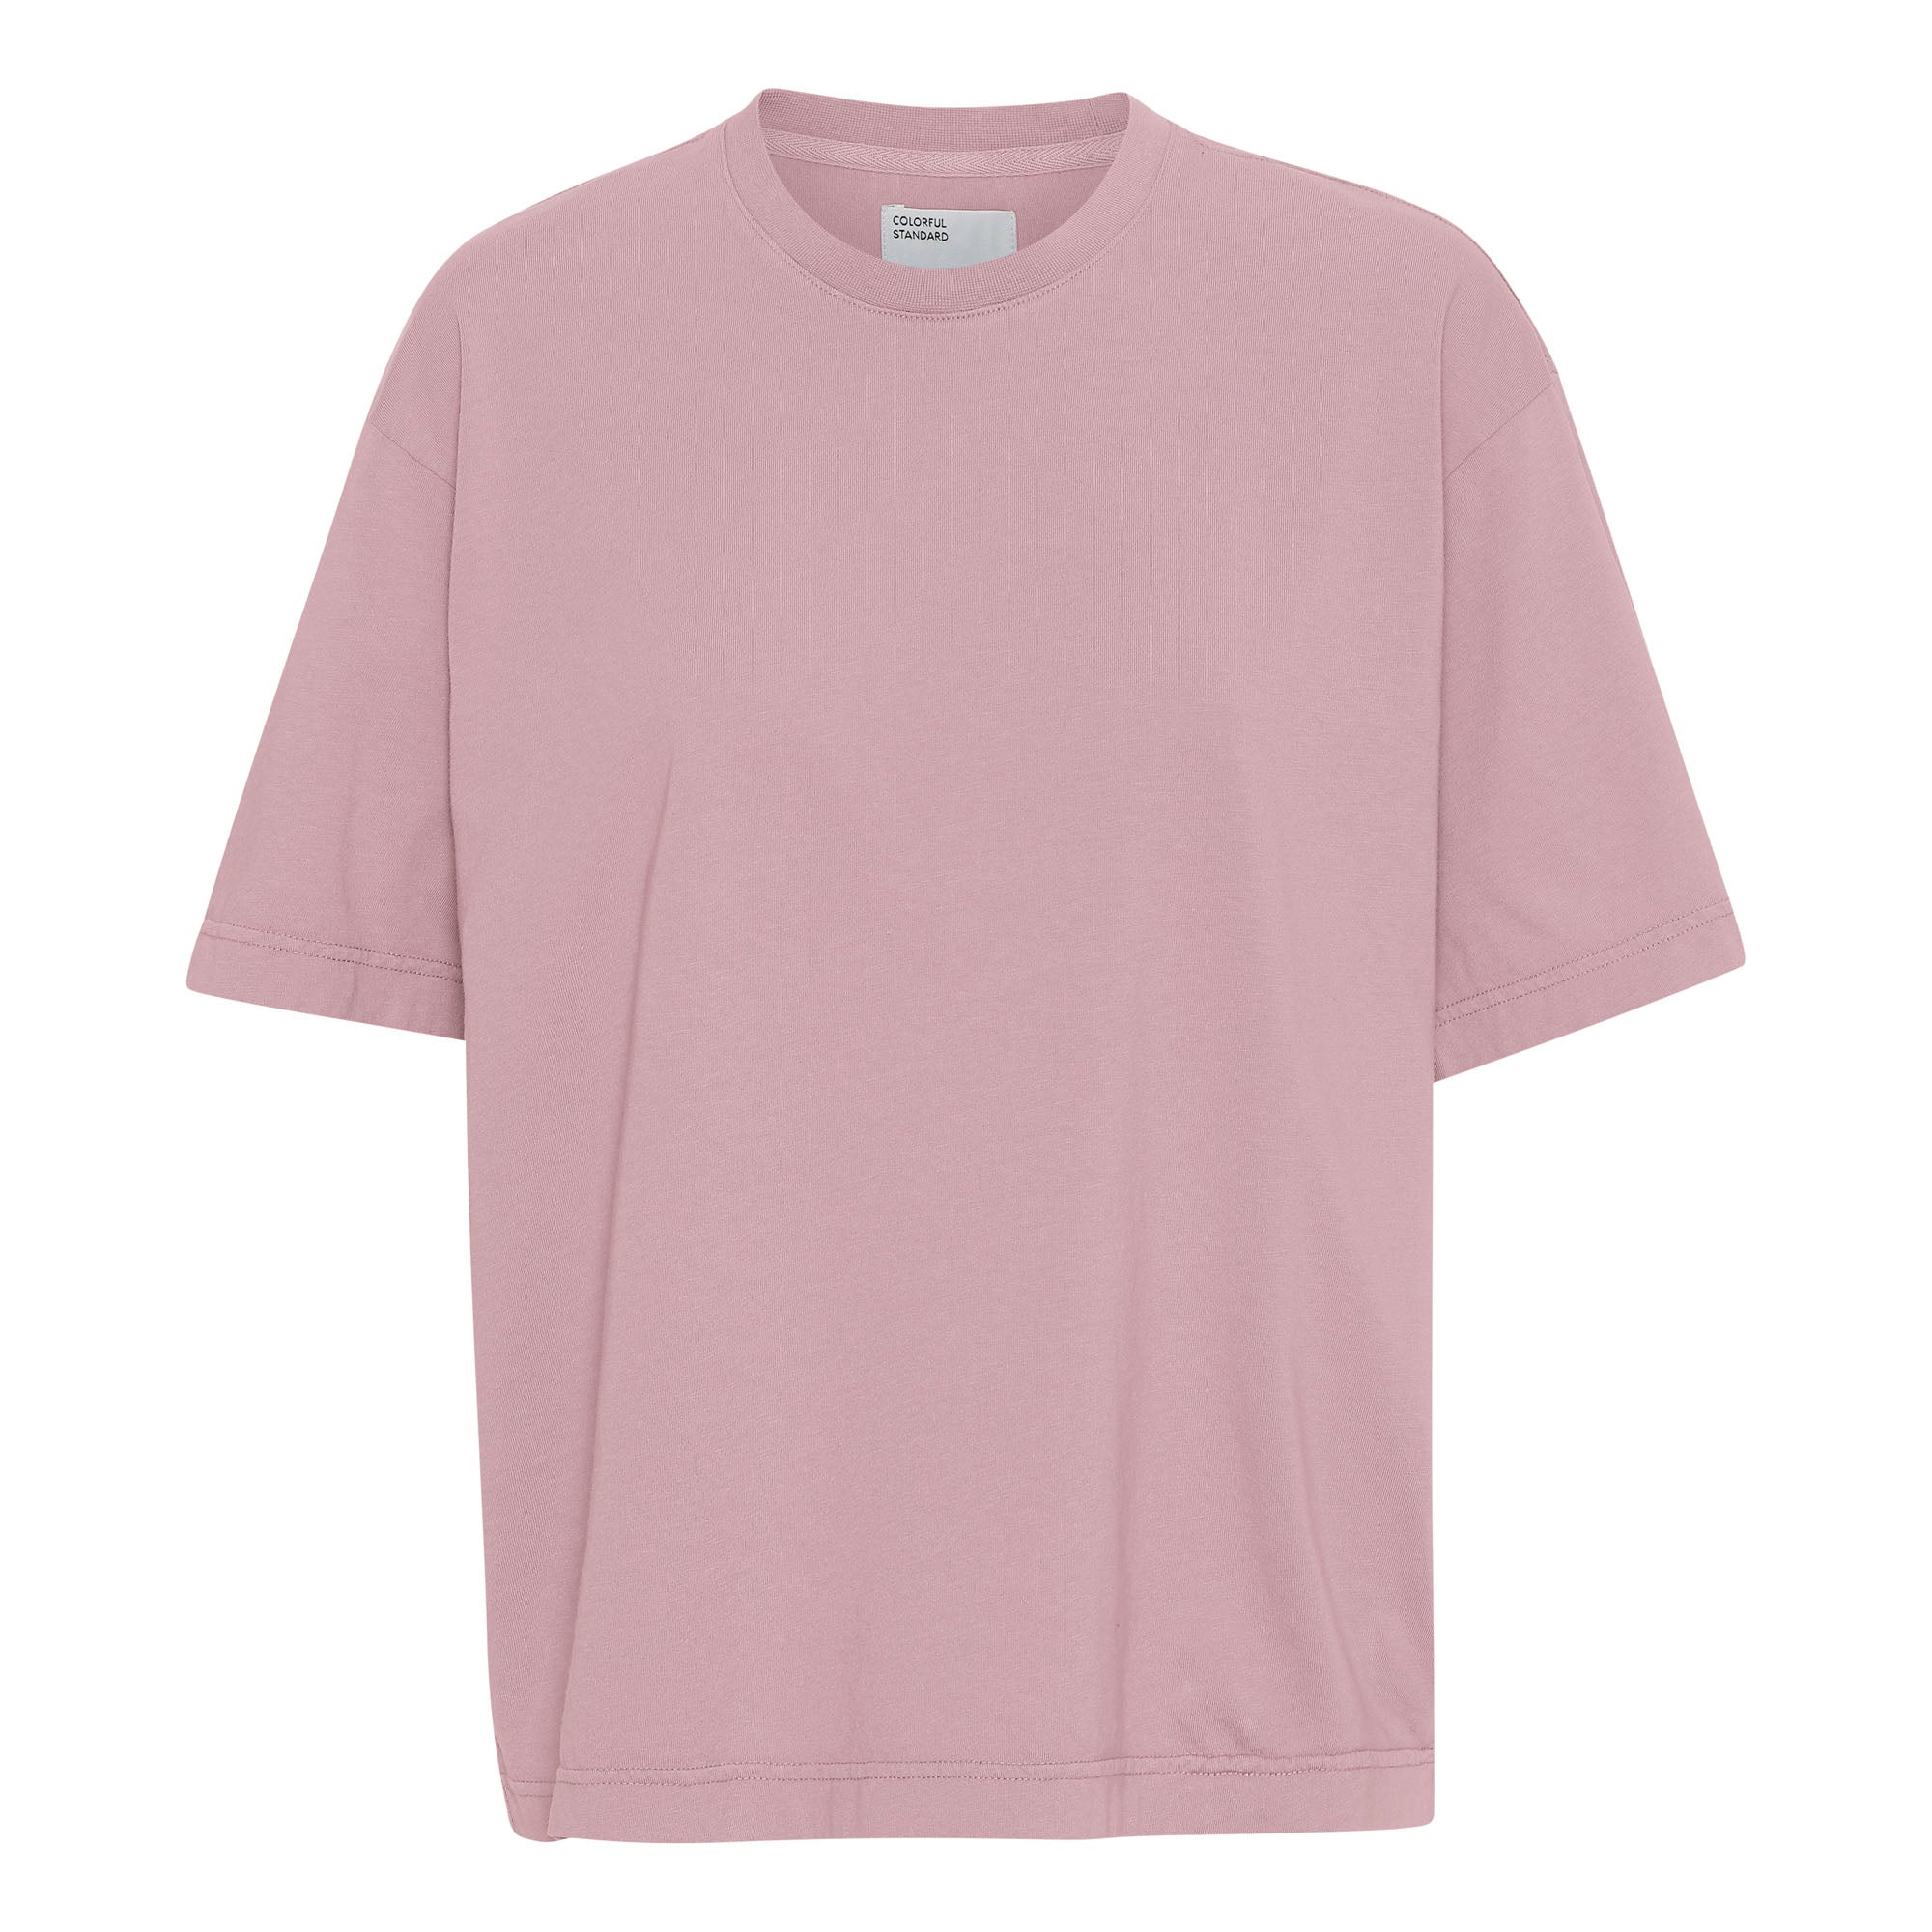 Oversized Tee Faded Pink